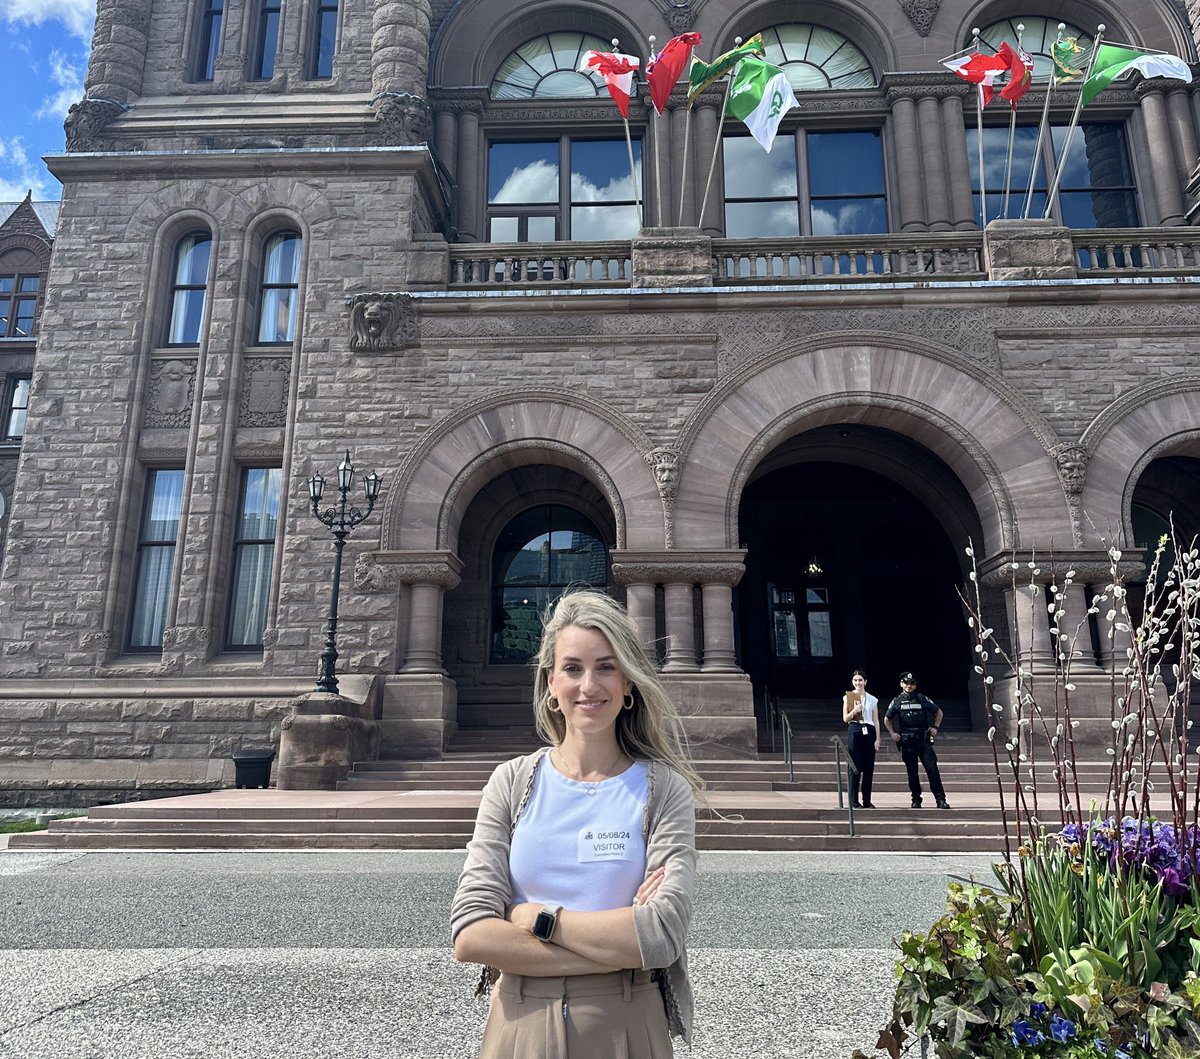 Today I testified in the Ontario legislature about cracking down on puppy mills through licensing & strict standards of care for all dog breeding. The province’s PUPS Act doesn’t do this and must be improved. Take action here to demand better! action.animaljustice.ca/page/149236/-/1